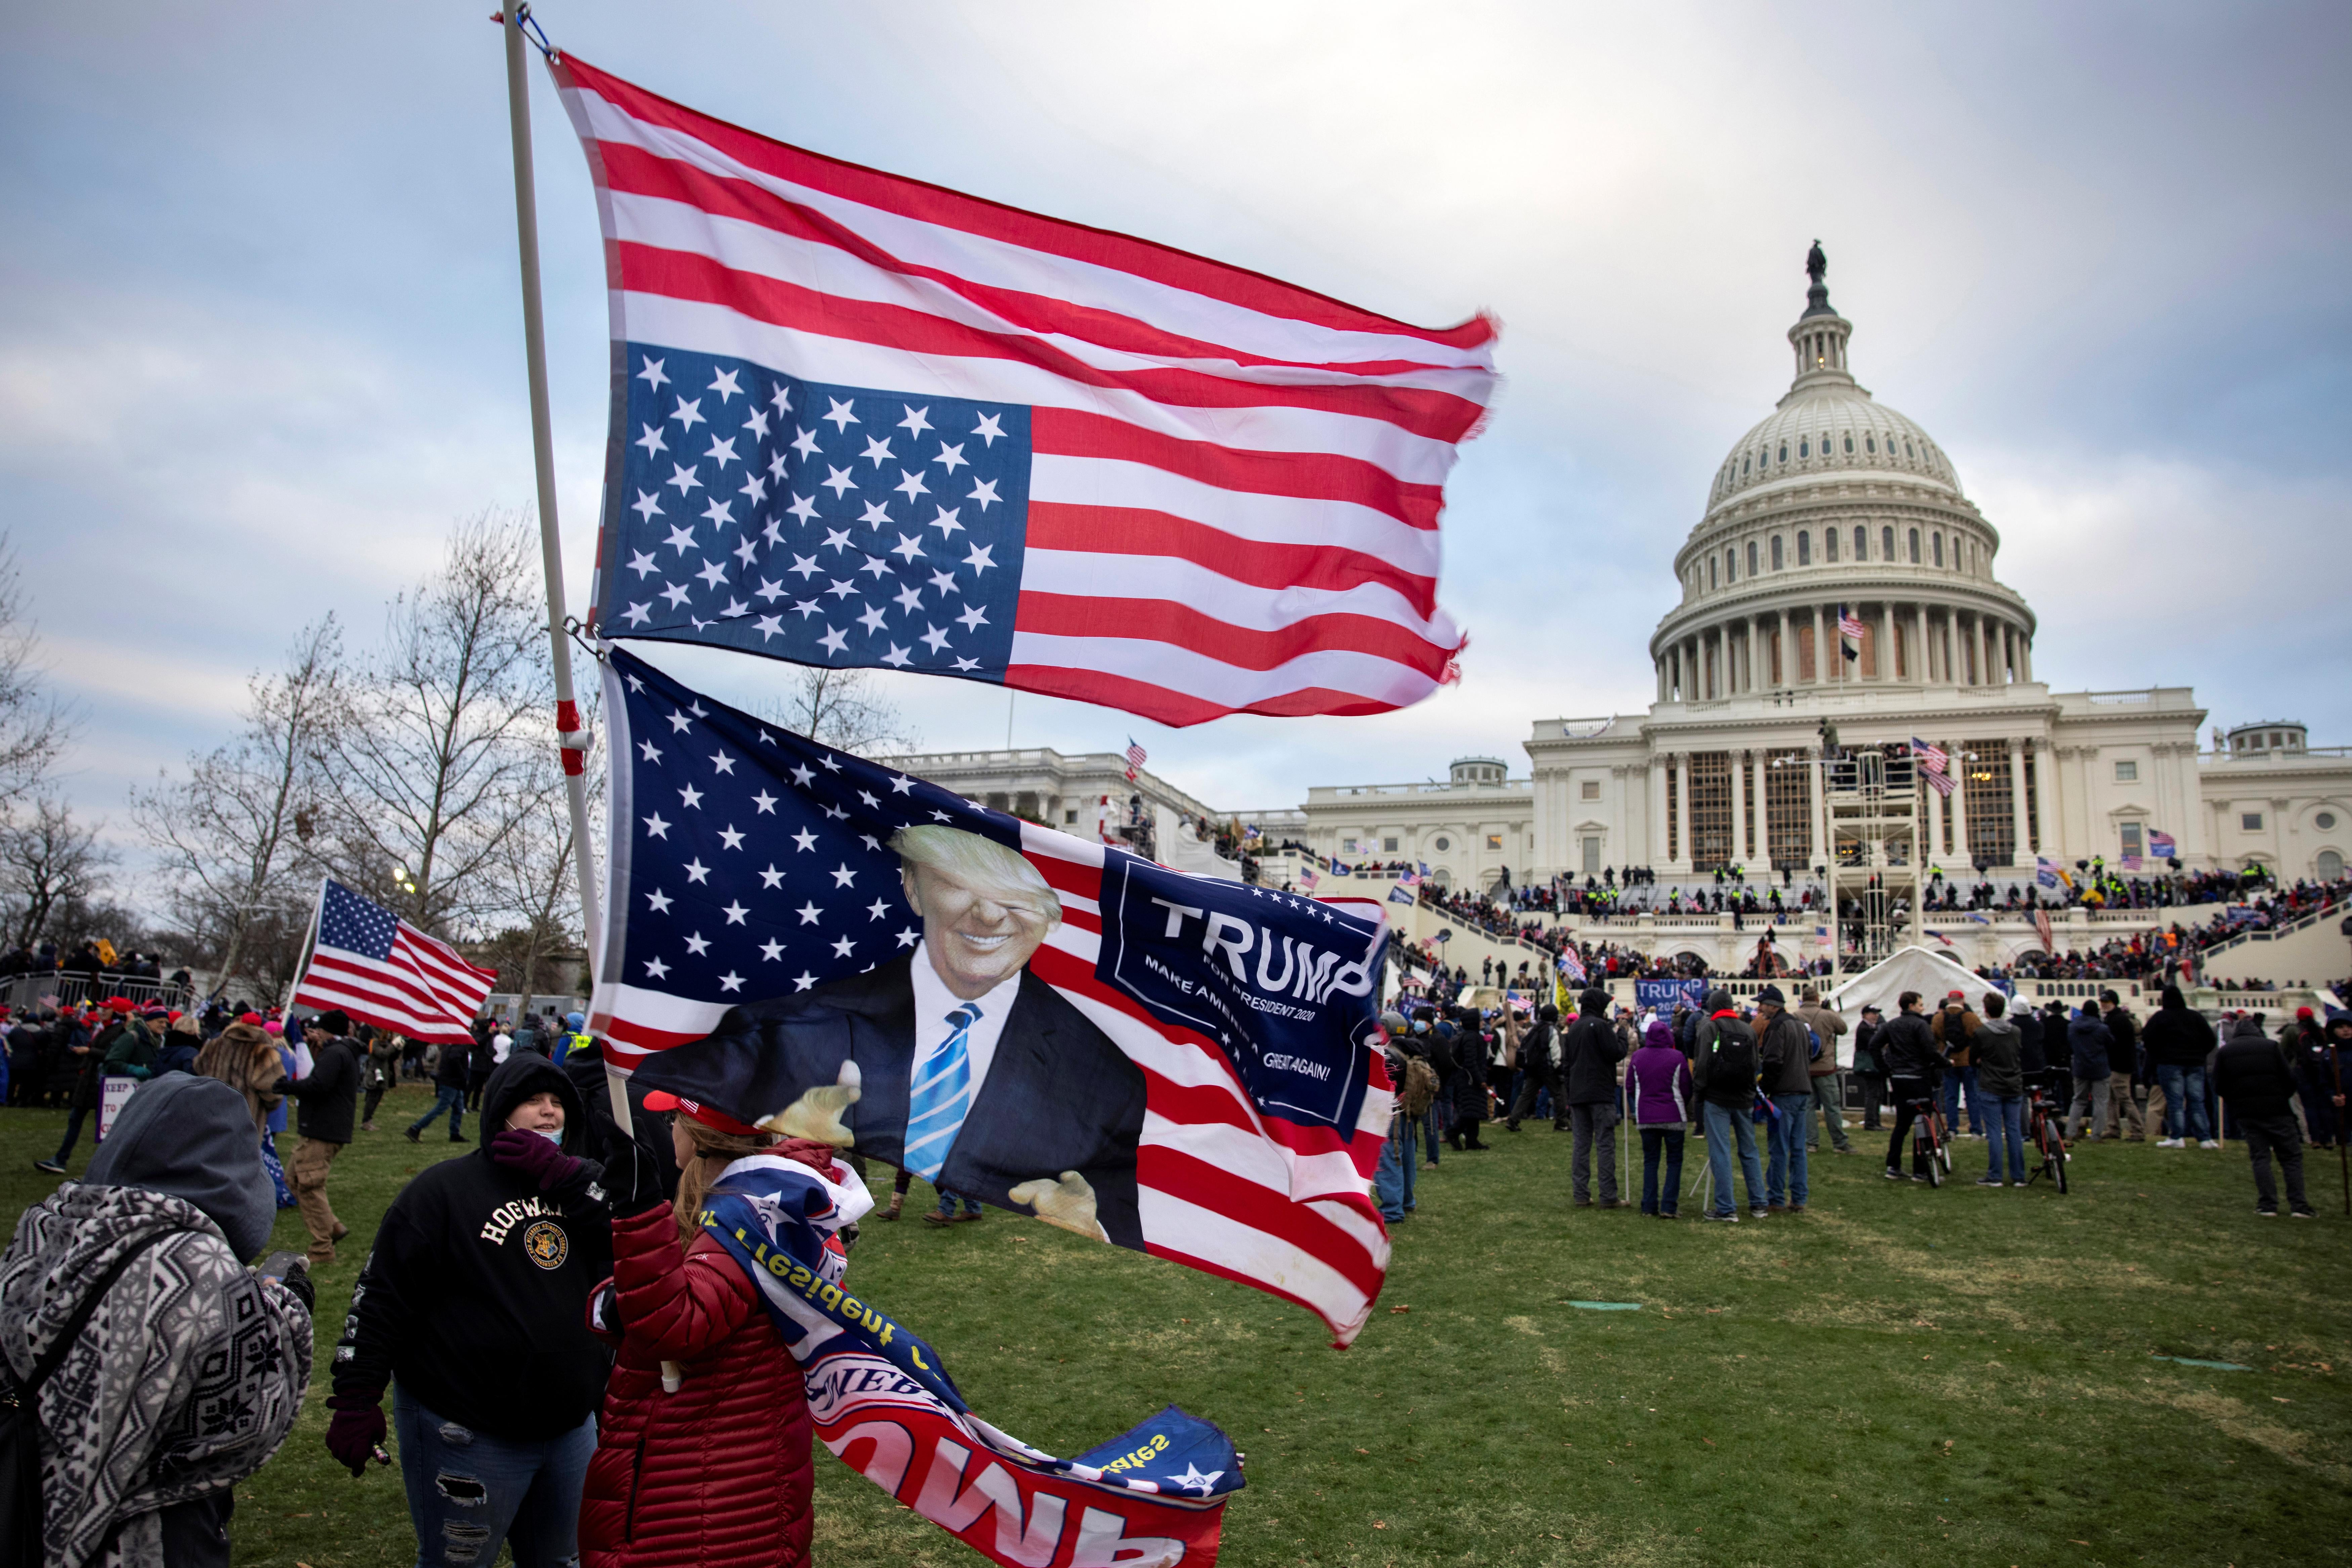 Pro-Trump rioters gather in front of the U.S. Capitol Building on Jan. 6, 2021 in Washington, DC.